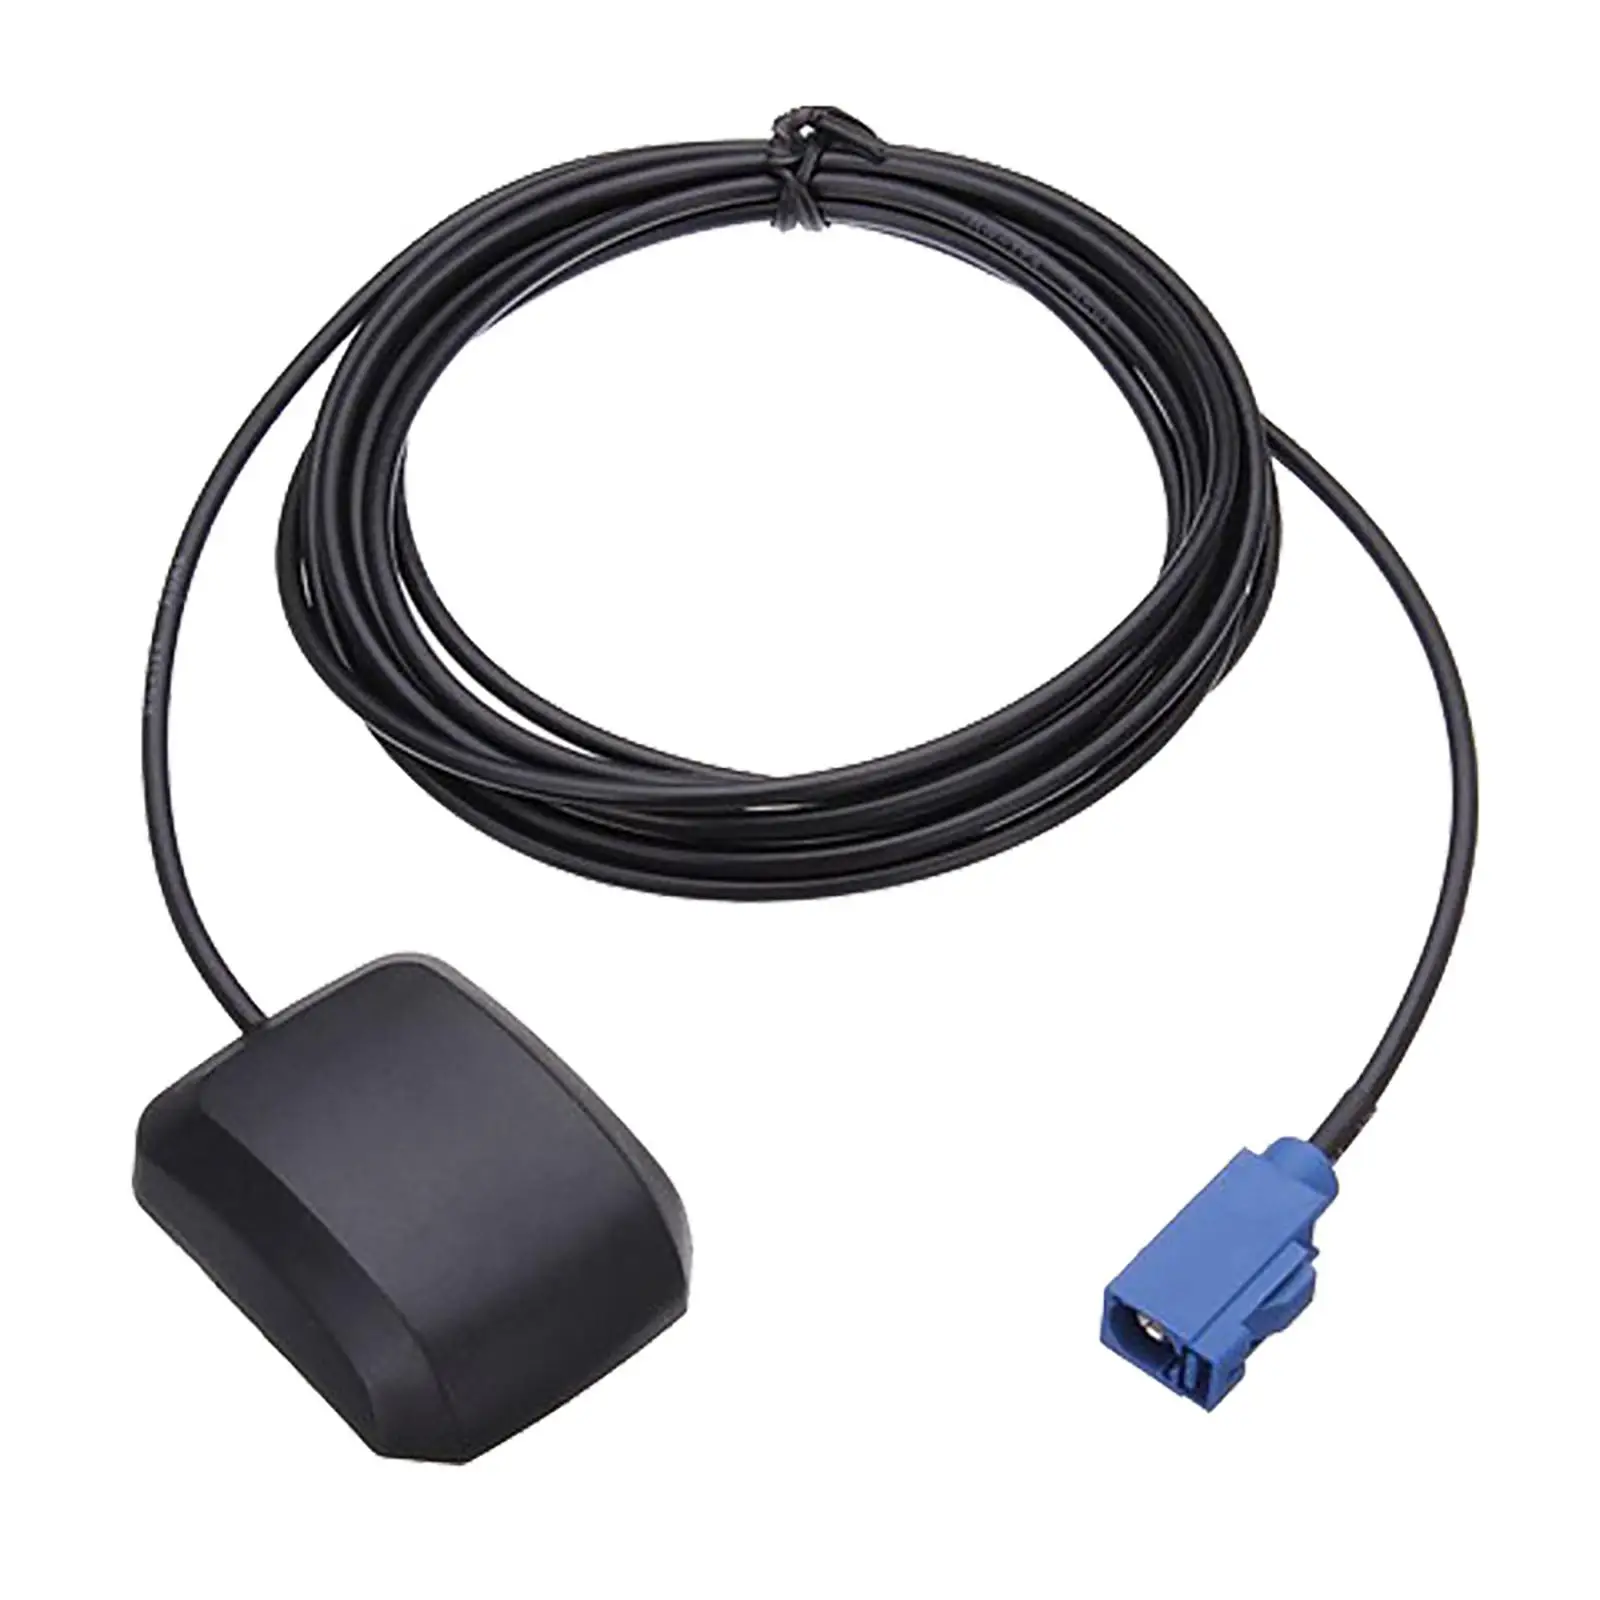 Vehicle Active Navigation with C Male Connector for Car Truck SUV Stereo Boat Marine Accessory